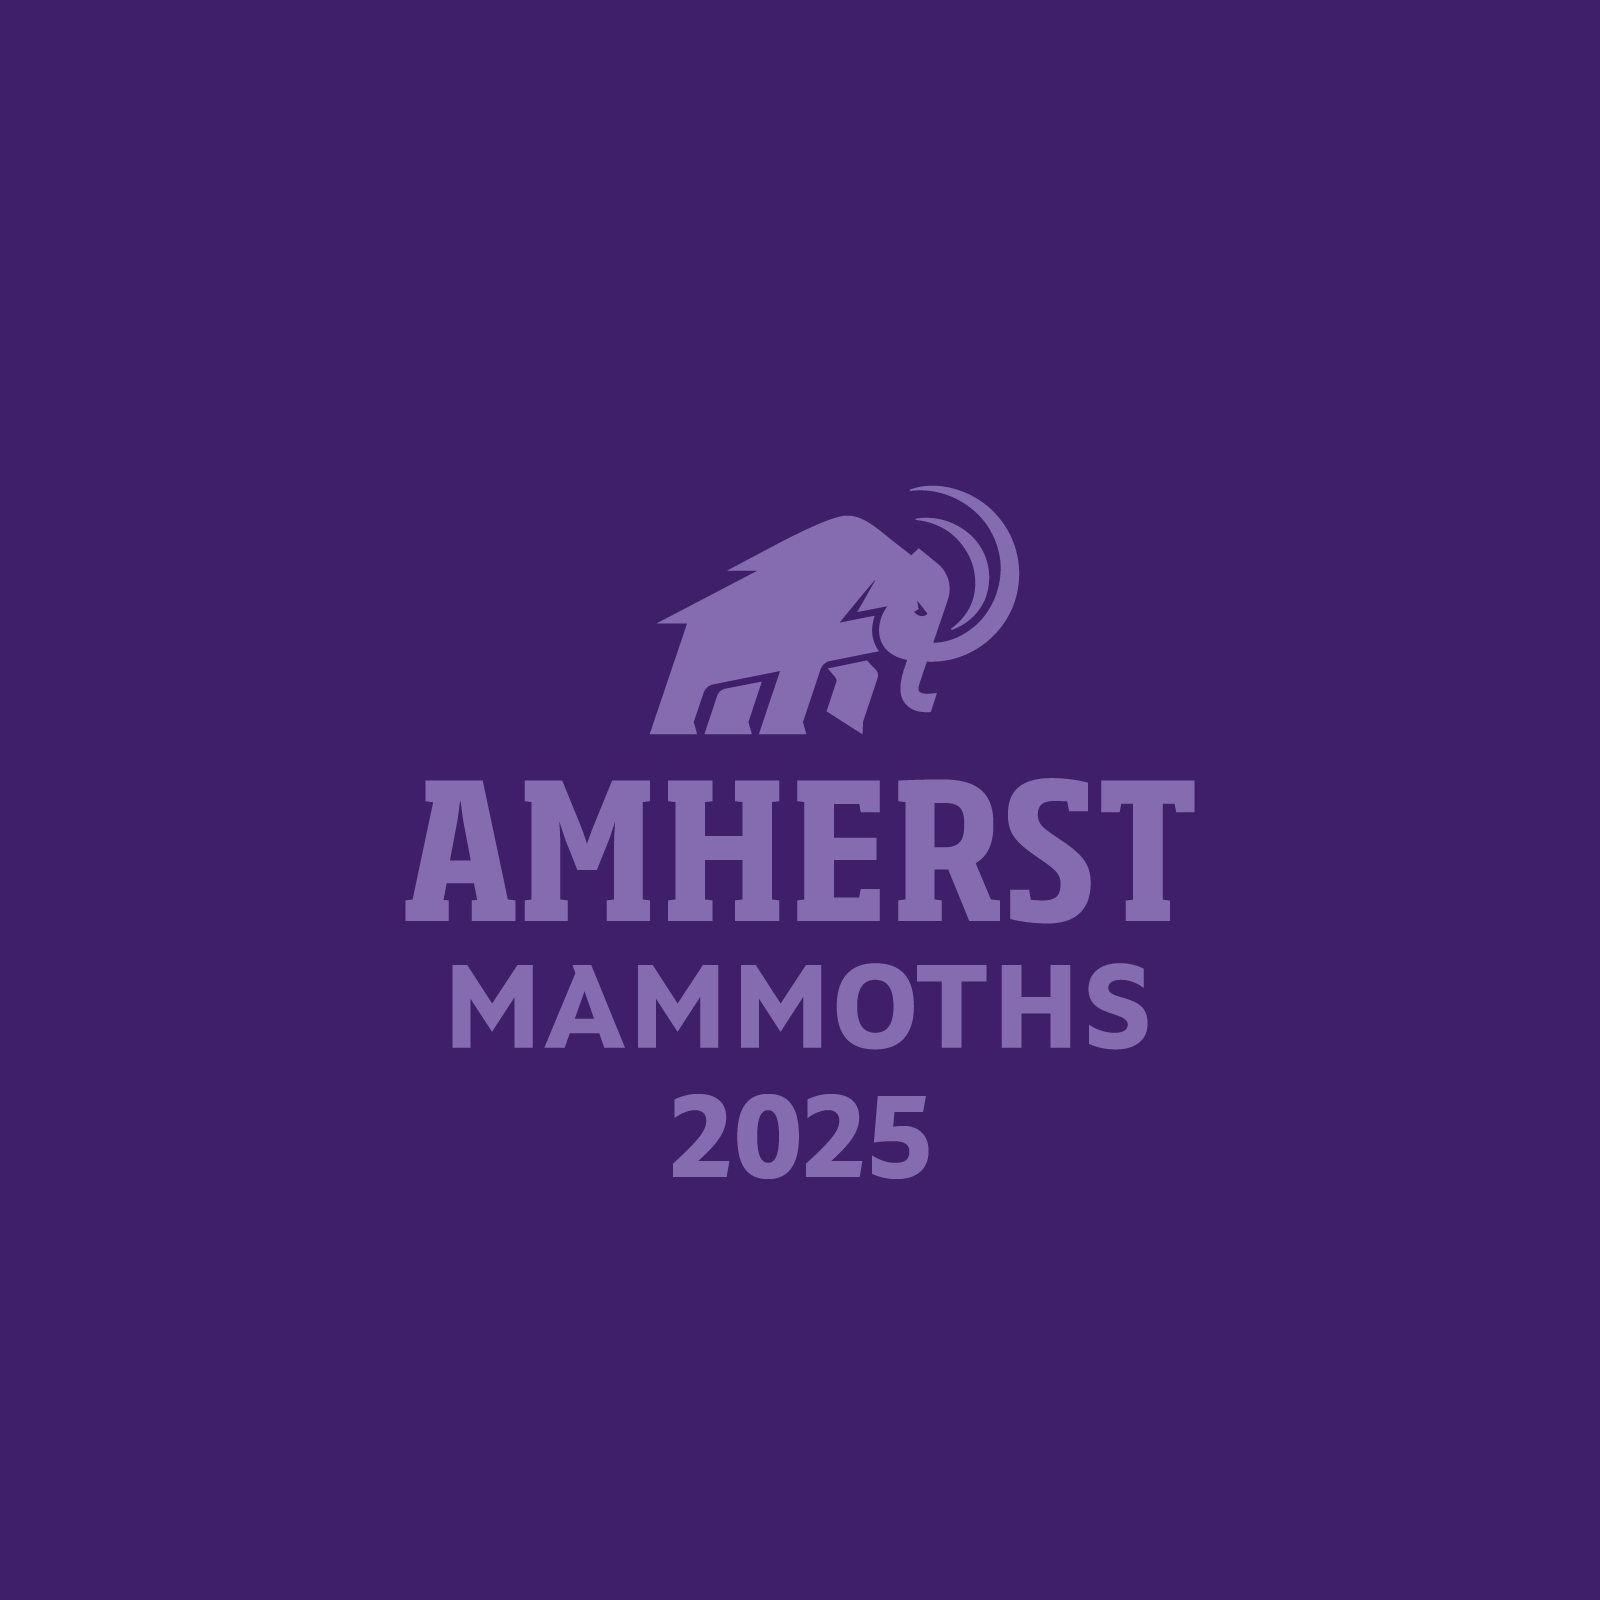 mammoth on purple background with text Amherst Mammoths Class of 2025